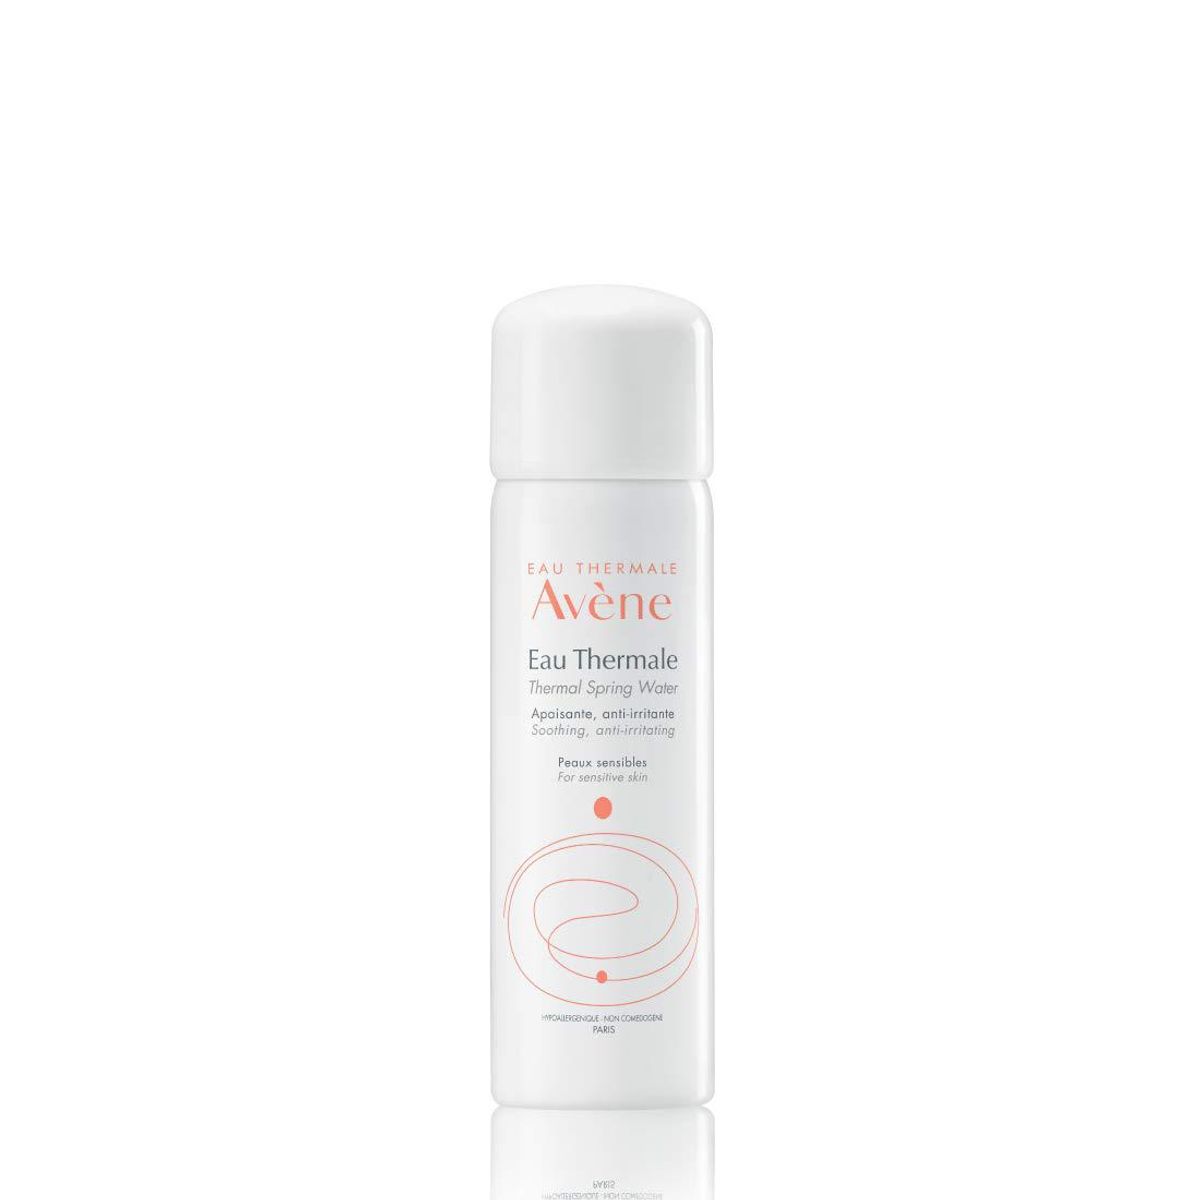 eau thermale avene thermal spring water soothing calming facial mist spray for sensitive skin